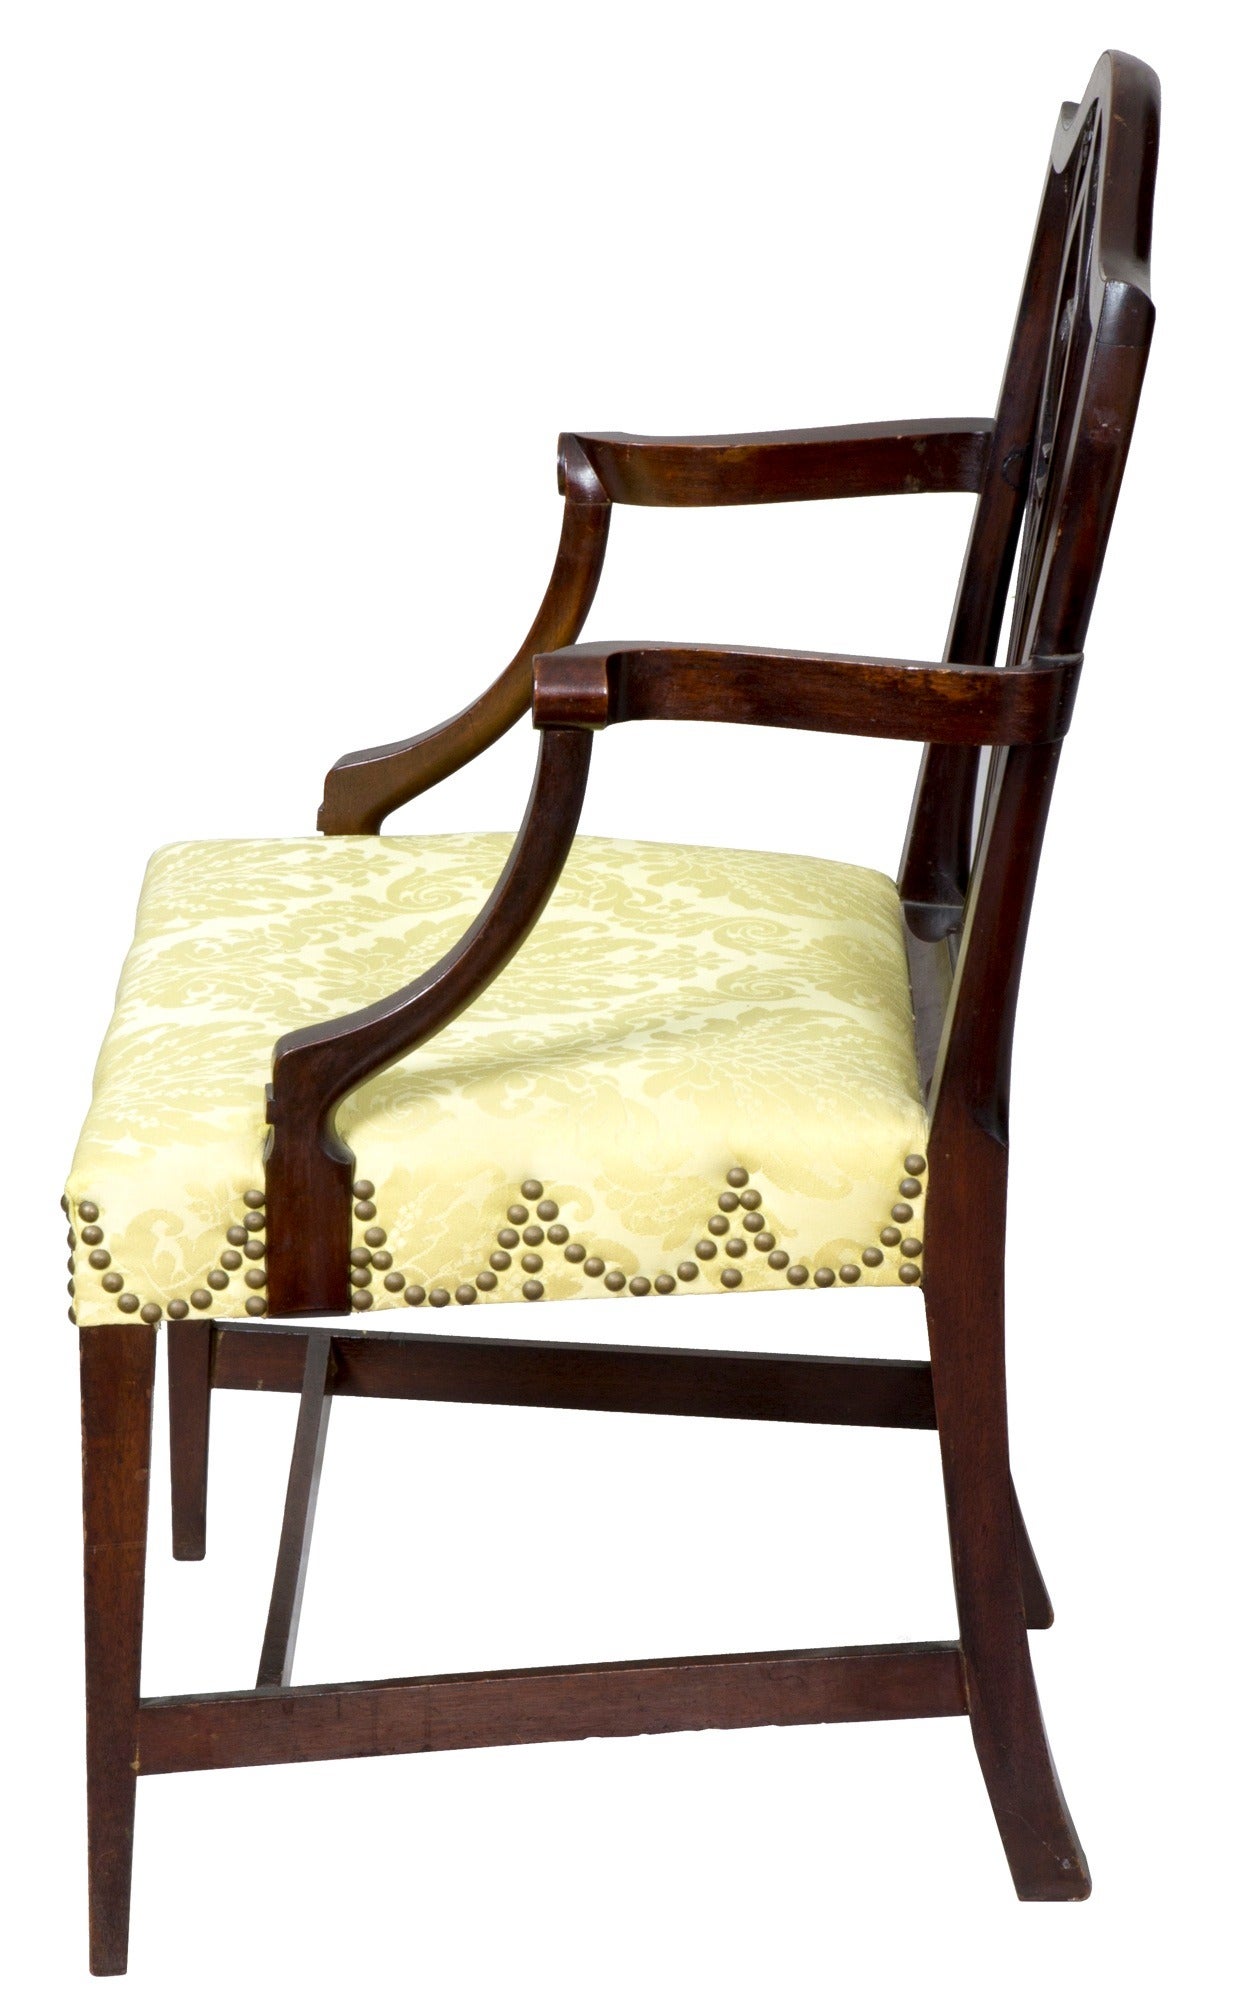 Mahogany Hepplewhite Armchair, Rhode Island or Connecticut, circa 1800 In Excellent Condition For Sale In Providence, RI